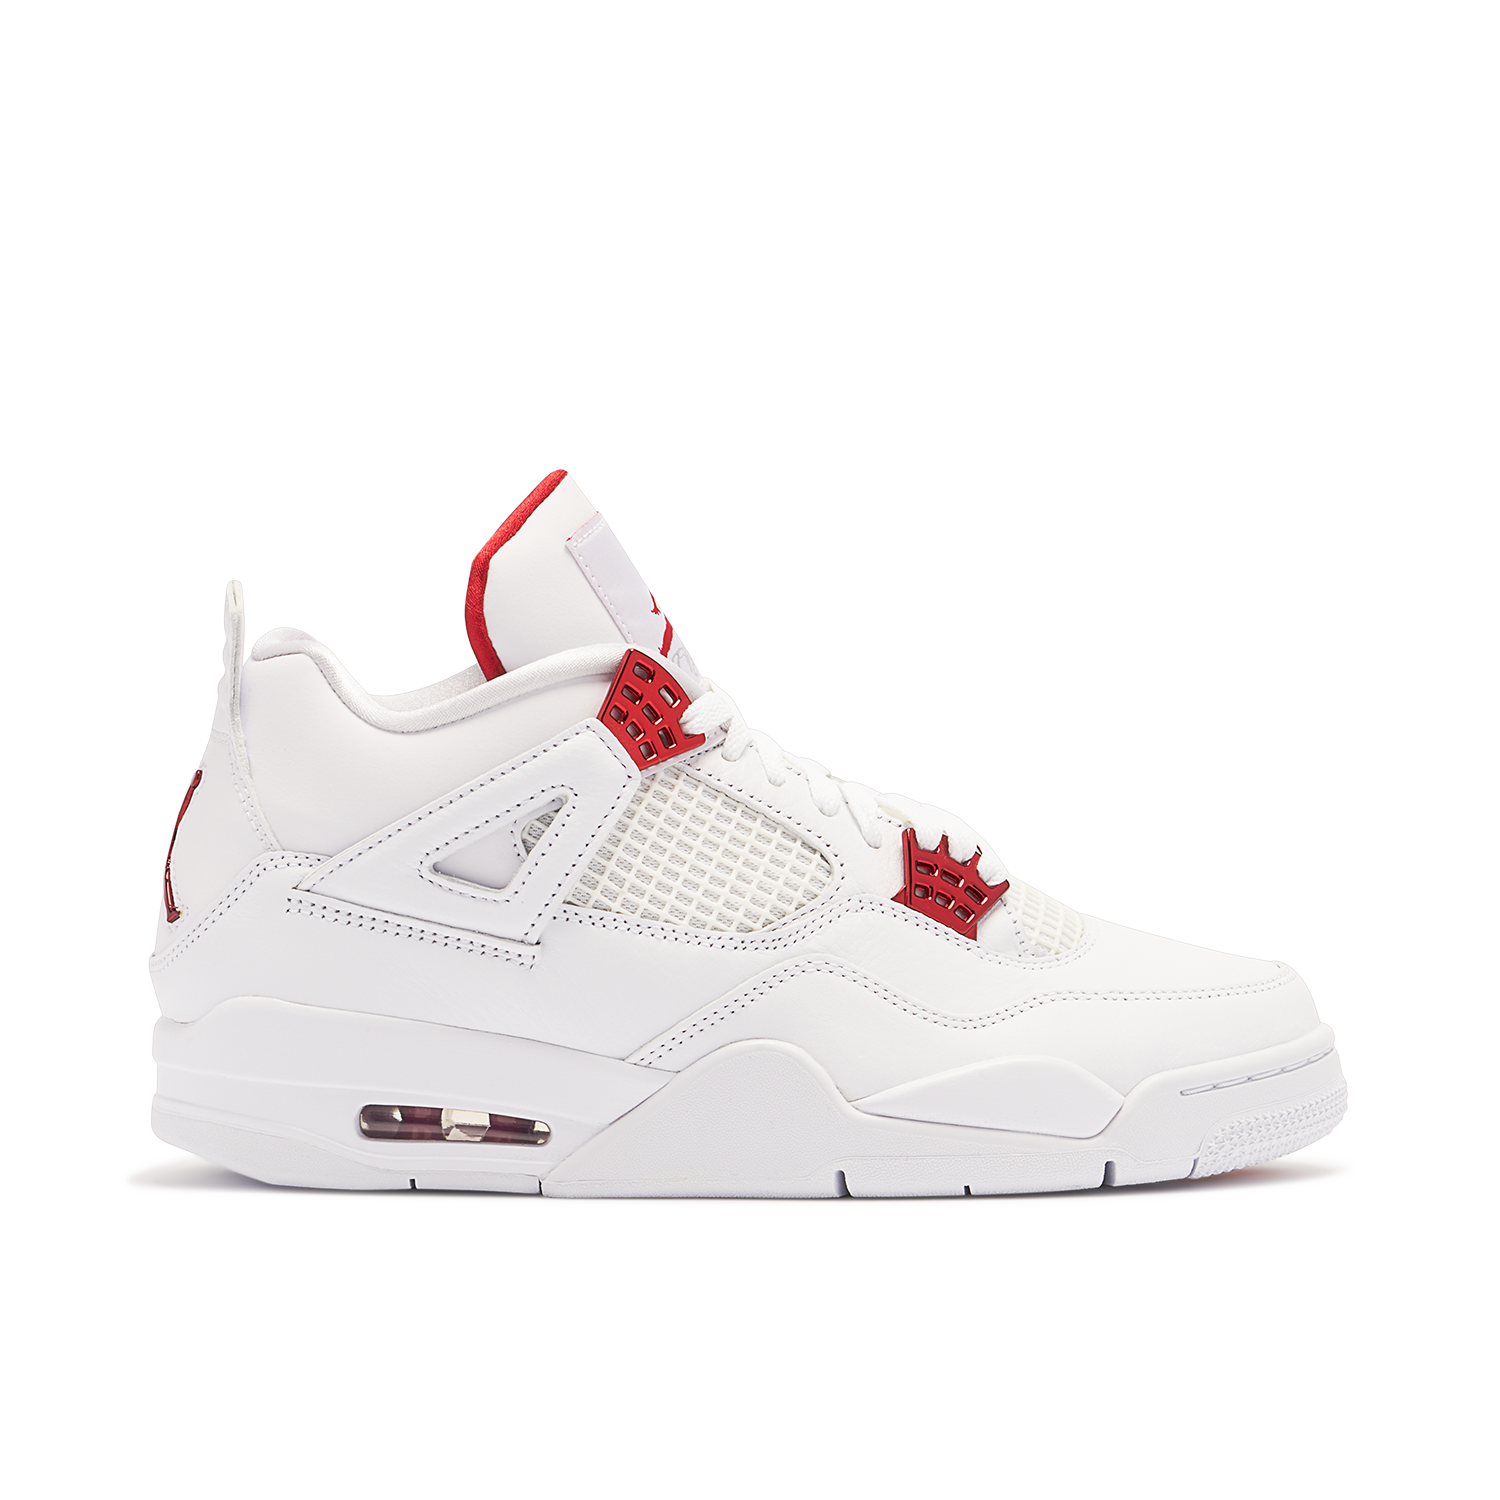 jordan 4 white and red